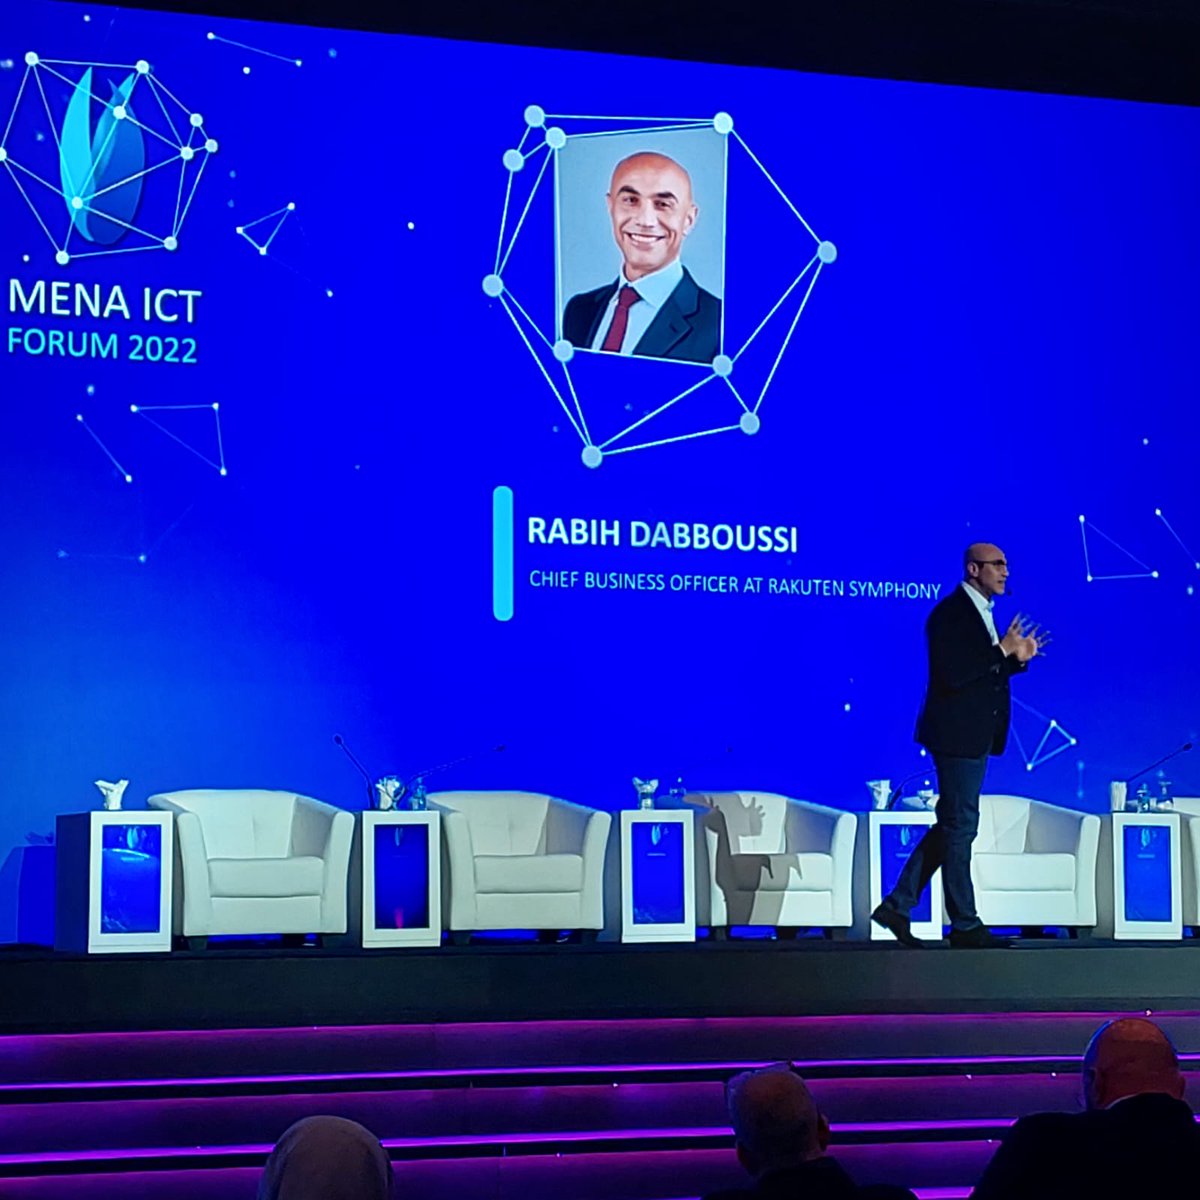 'The ability for you to operate on a patient remotely will be a reality.' Rabih Dabboussi, Chief Business Officer at Rakuten Symphony #MENAICT2022